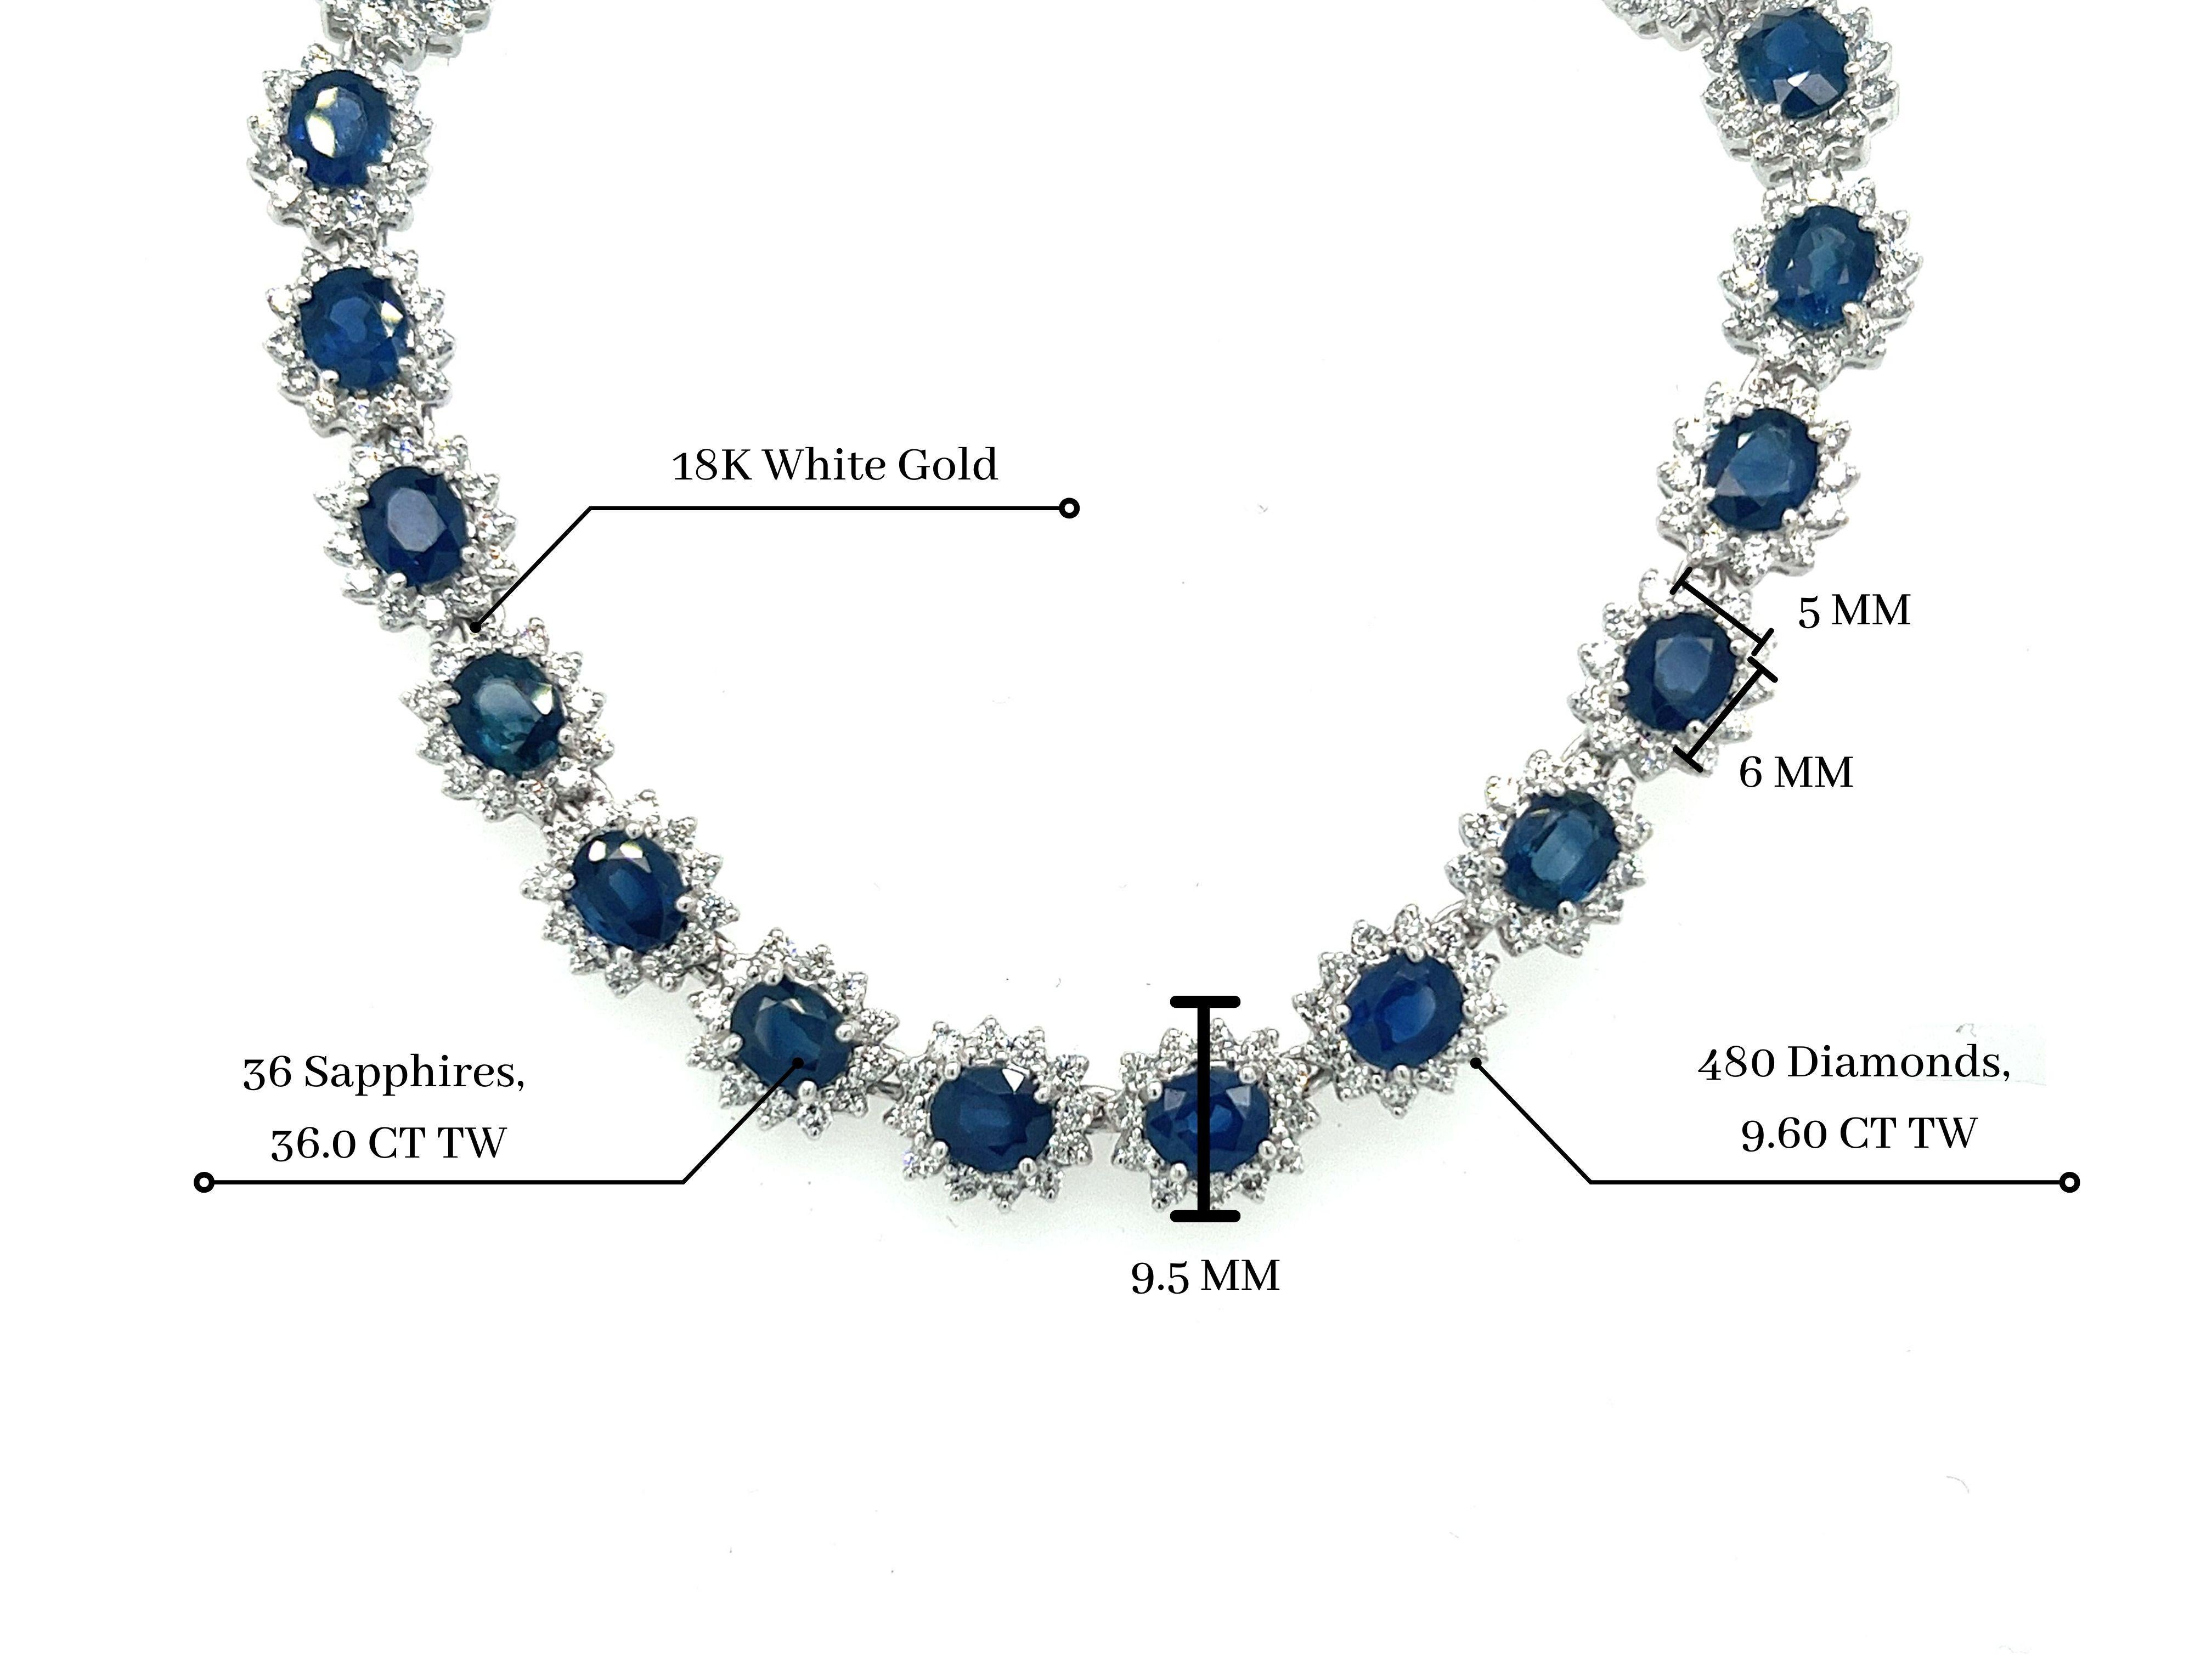 Introducing a circle link 18k white gold choker necklace with natural Blue Sapphires and diamonds.

40 individual links each containing a vivid no heat Blue Sapphire. The Sapphires are oval cut, totaling approximately 36.0 carats total and measuring